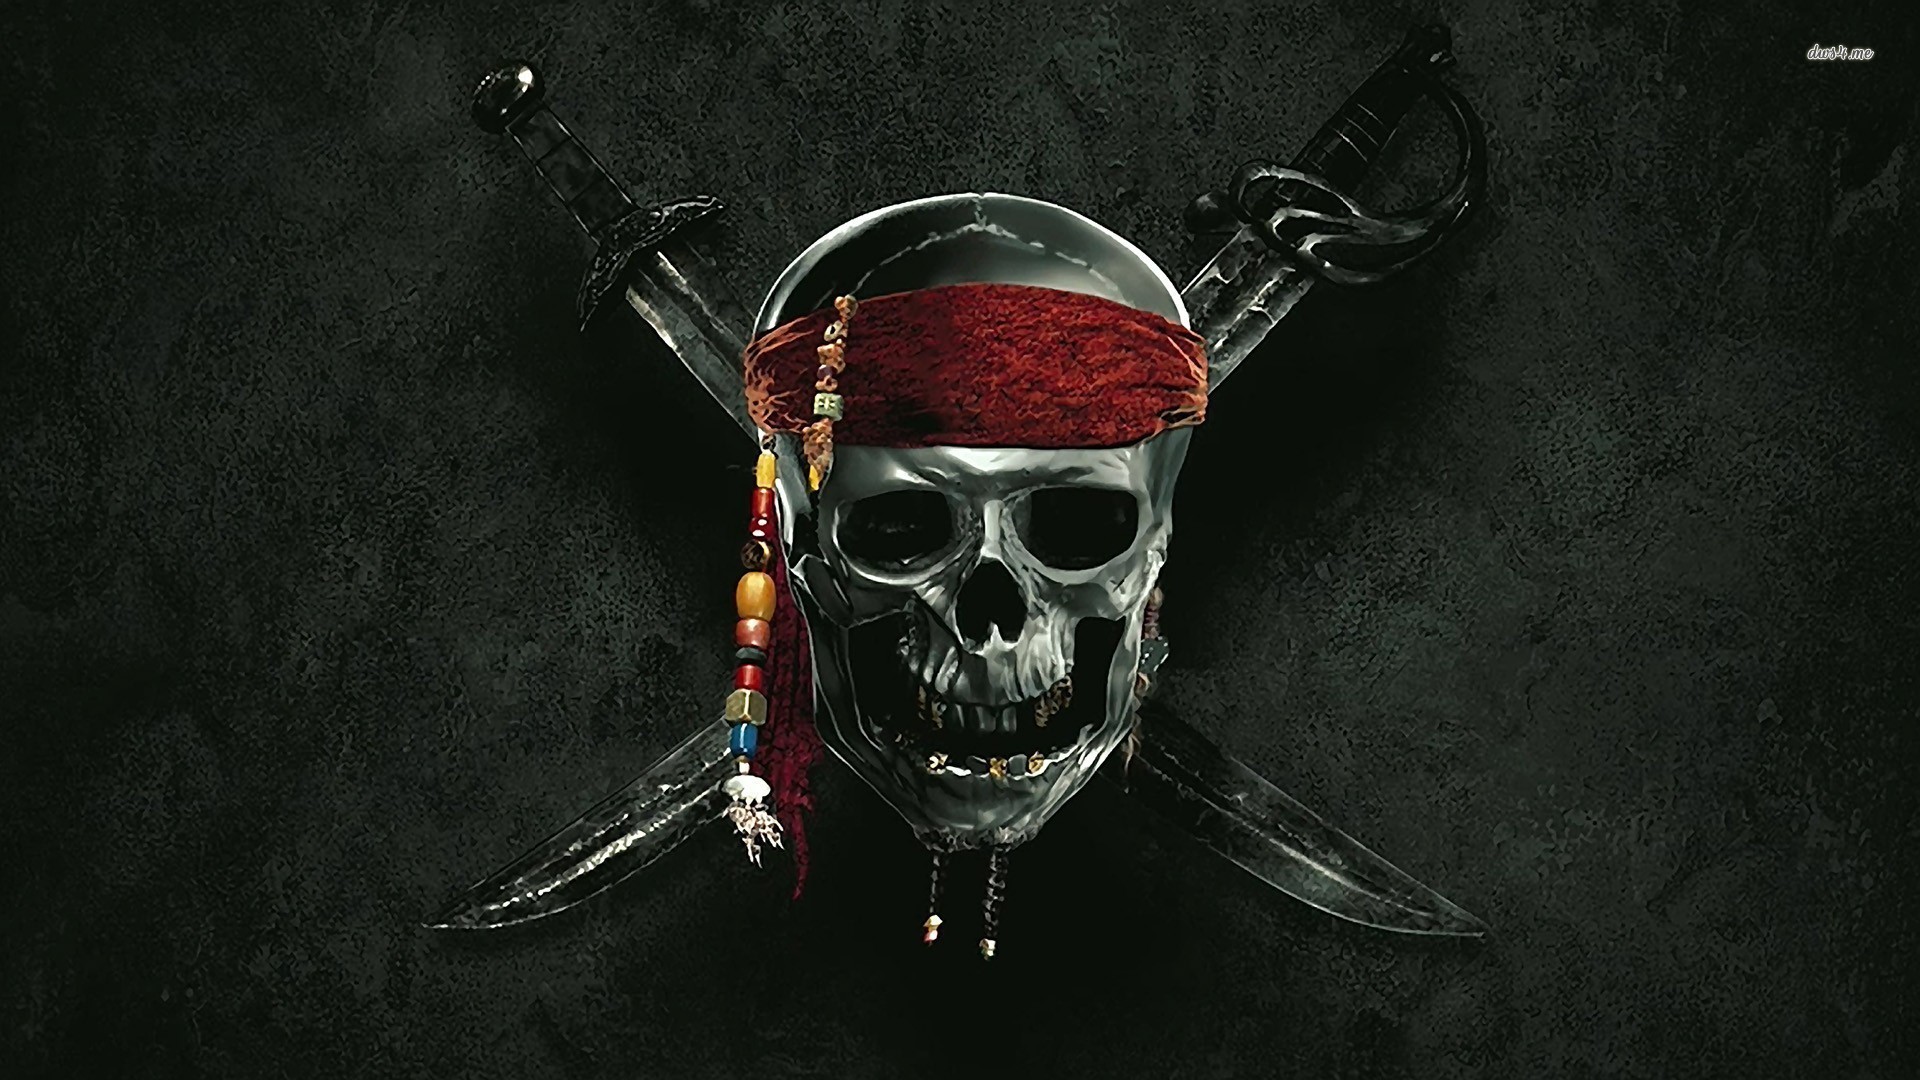 1920x1080 Pirates of the Caribbean wallpaper  .